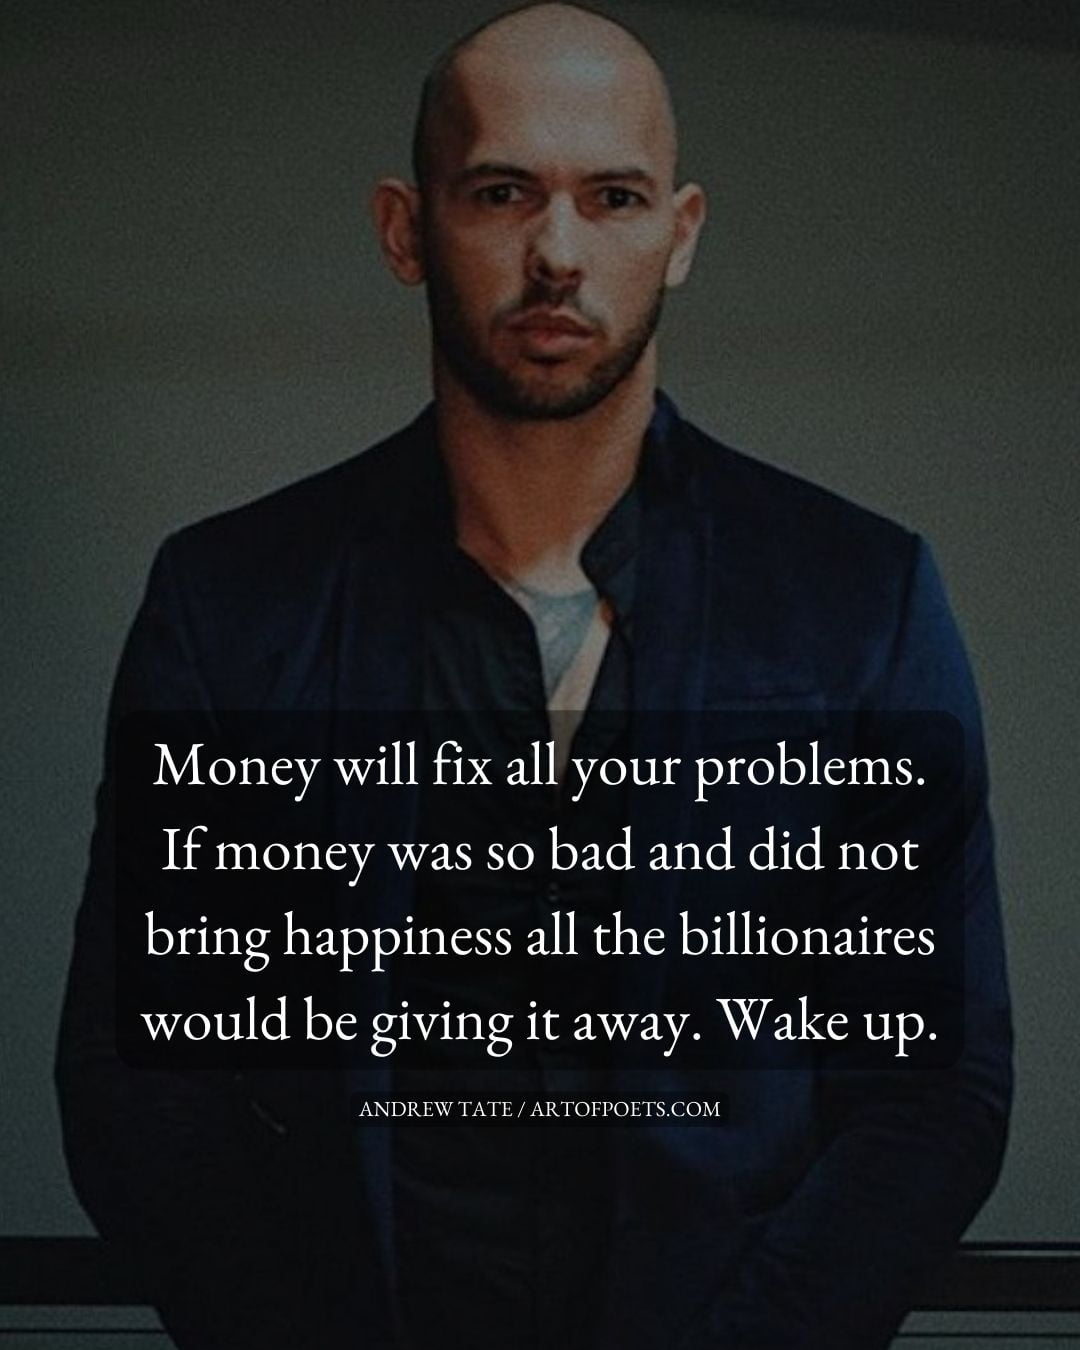 Money will fix all your problems. If money was so bad and did not bring happiness all the billionaires would be giving it away. Wake up 1